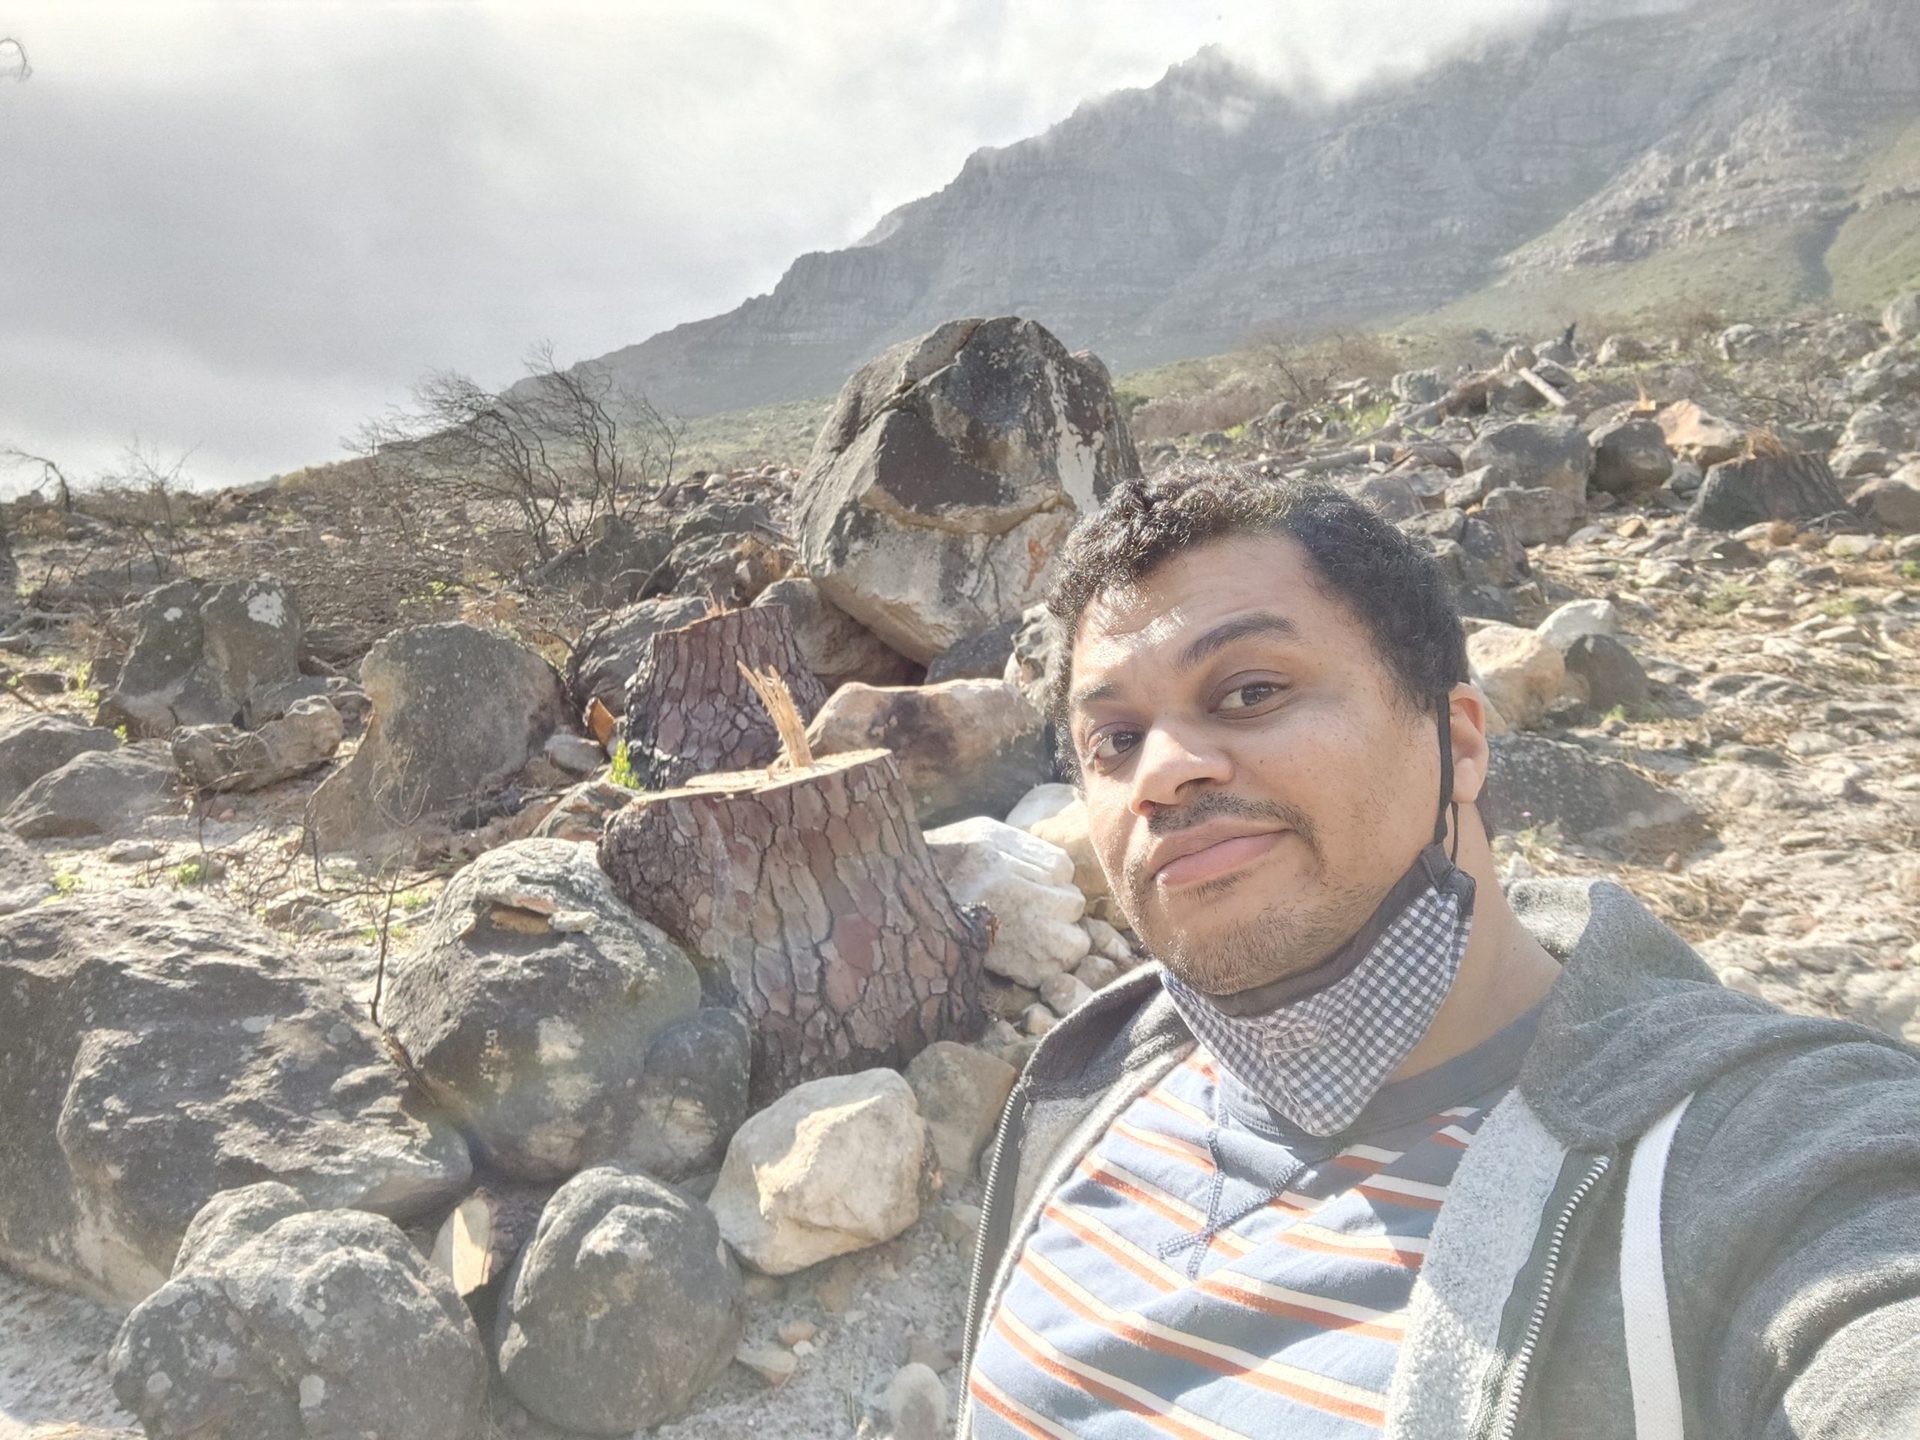 A vivo X70 Pro Plus selfie sample taken outdoors of a man with dark hair in a t-shirt and hoodie, with rocks behind him.